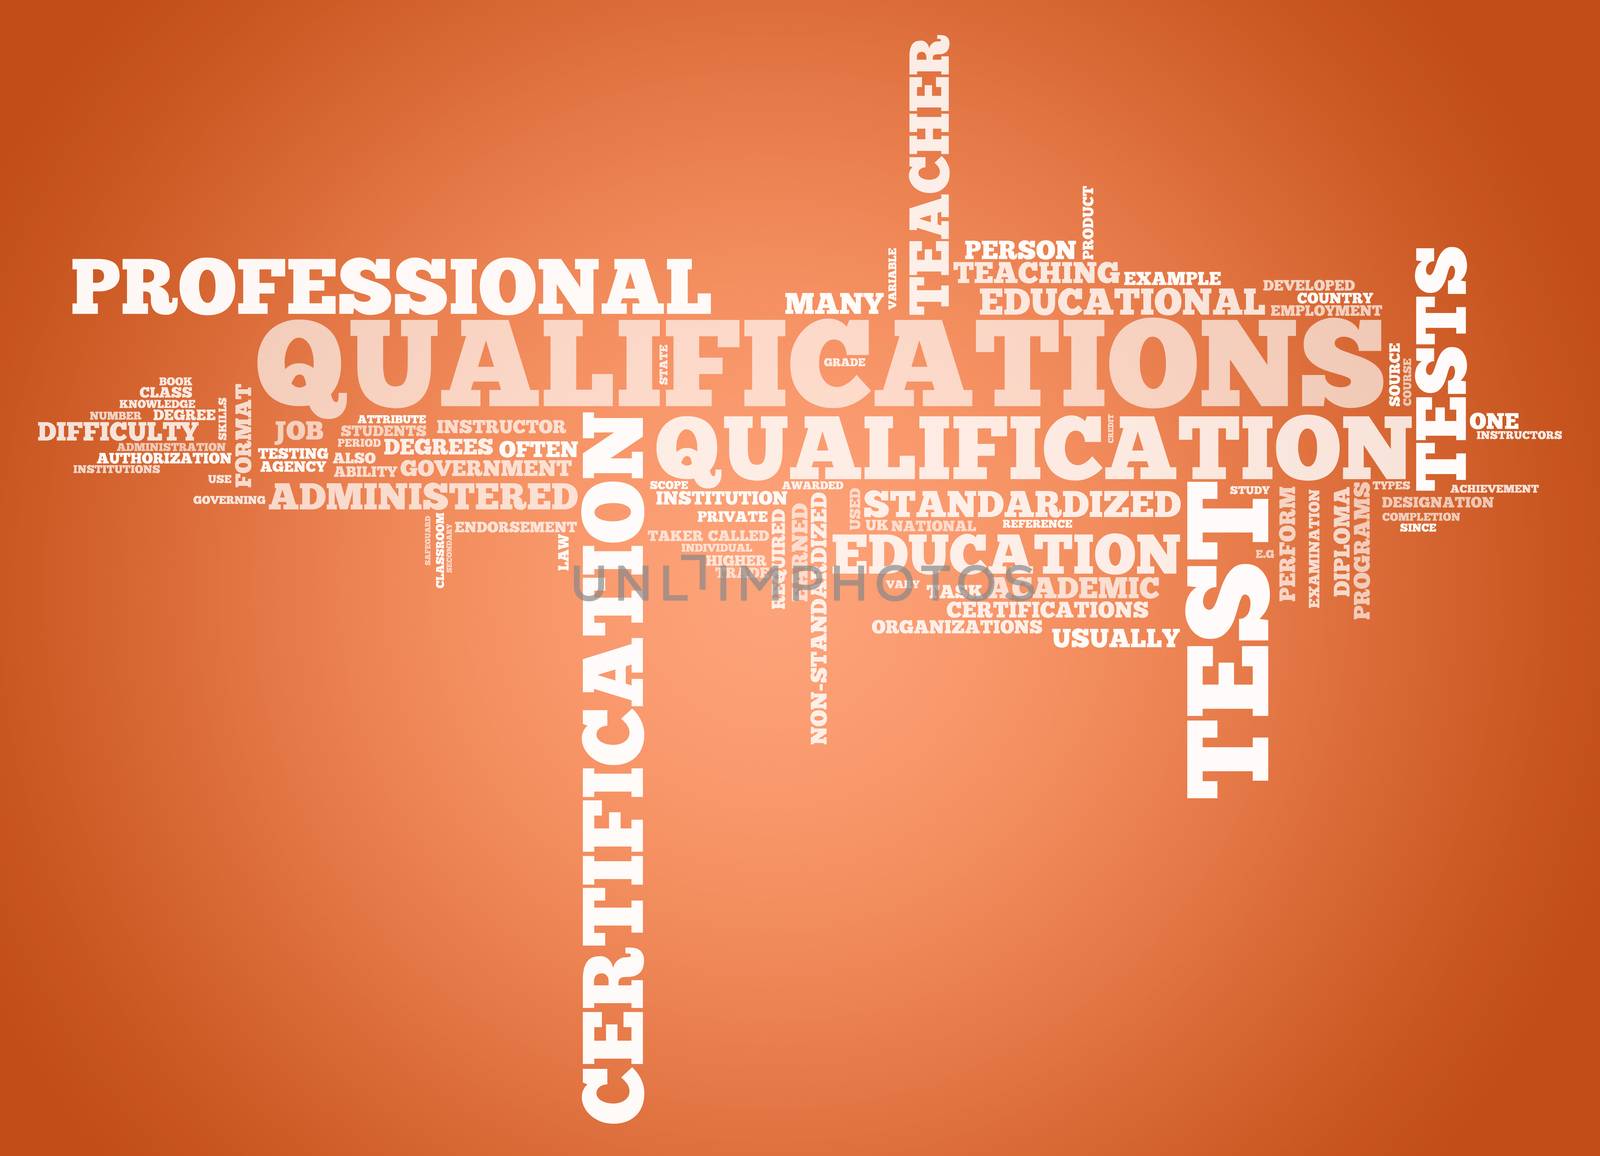 Word Cloud Qualifications by mindscanner